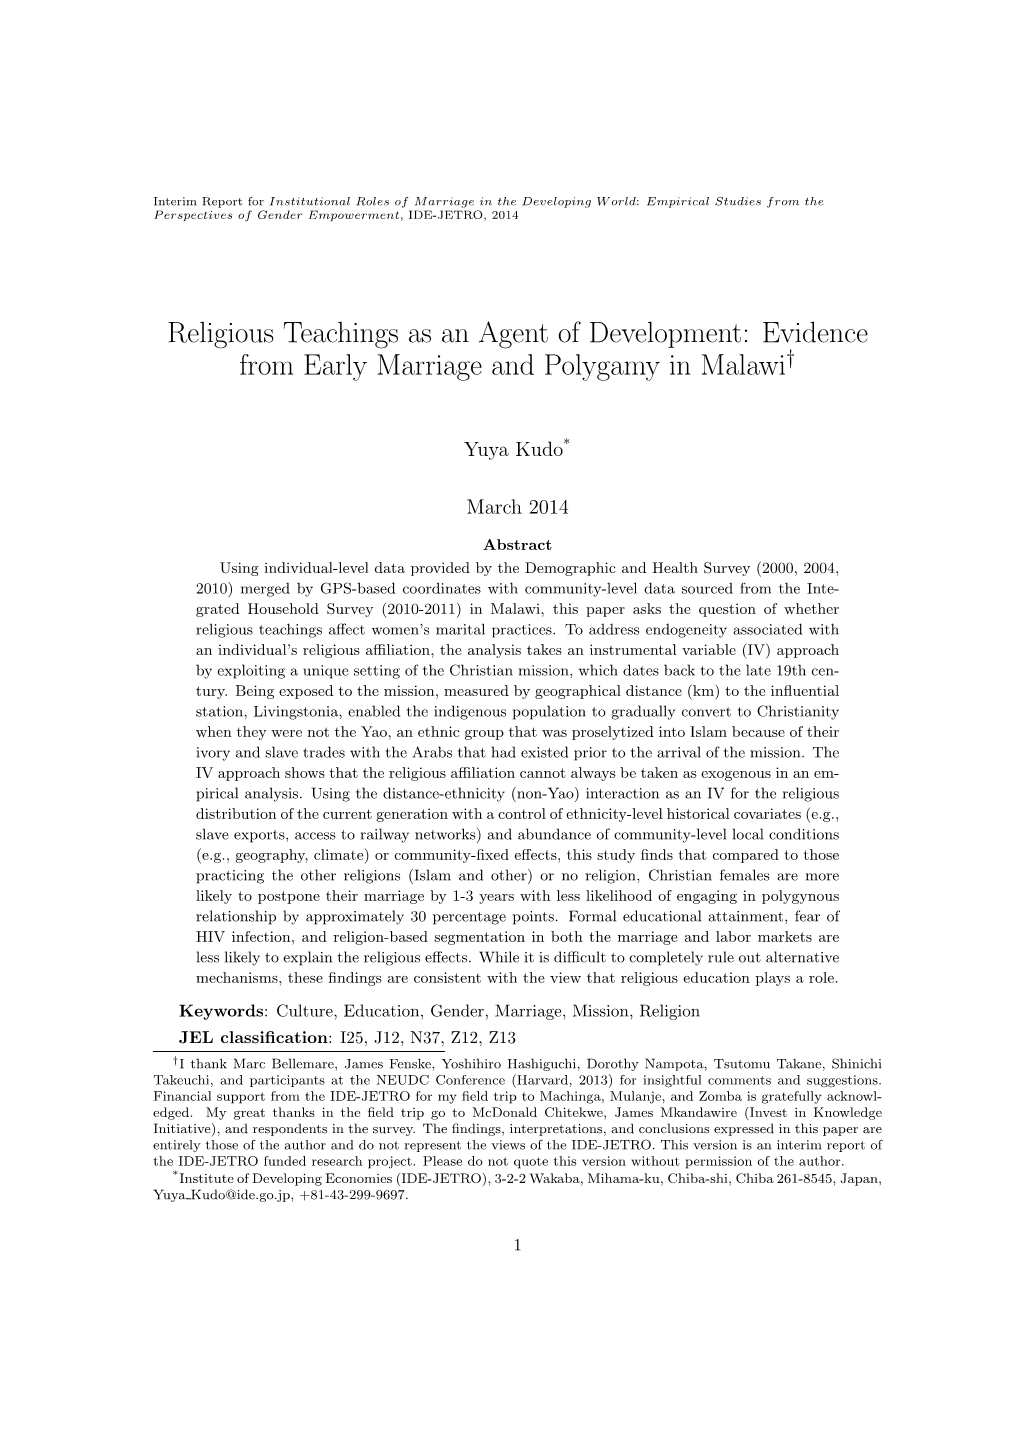 Evidence from Early Marriage and Polygamy in Malawi†